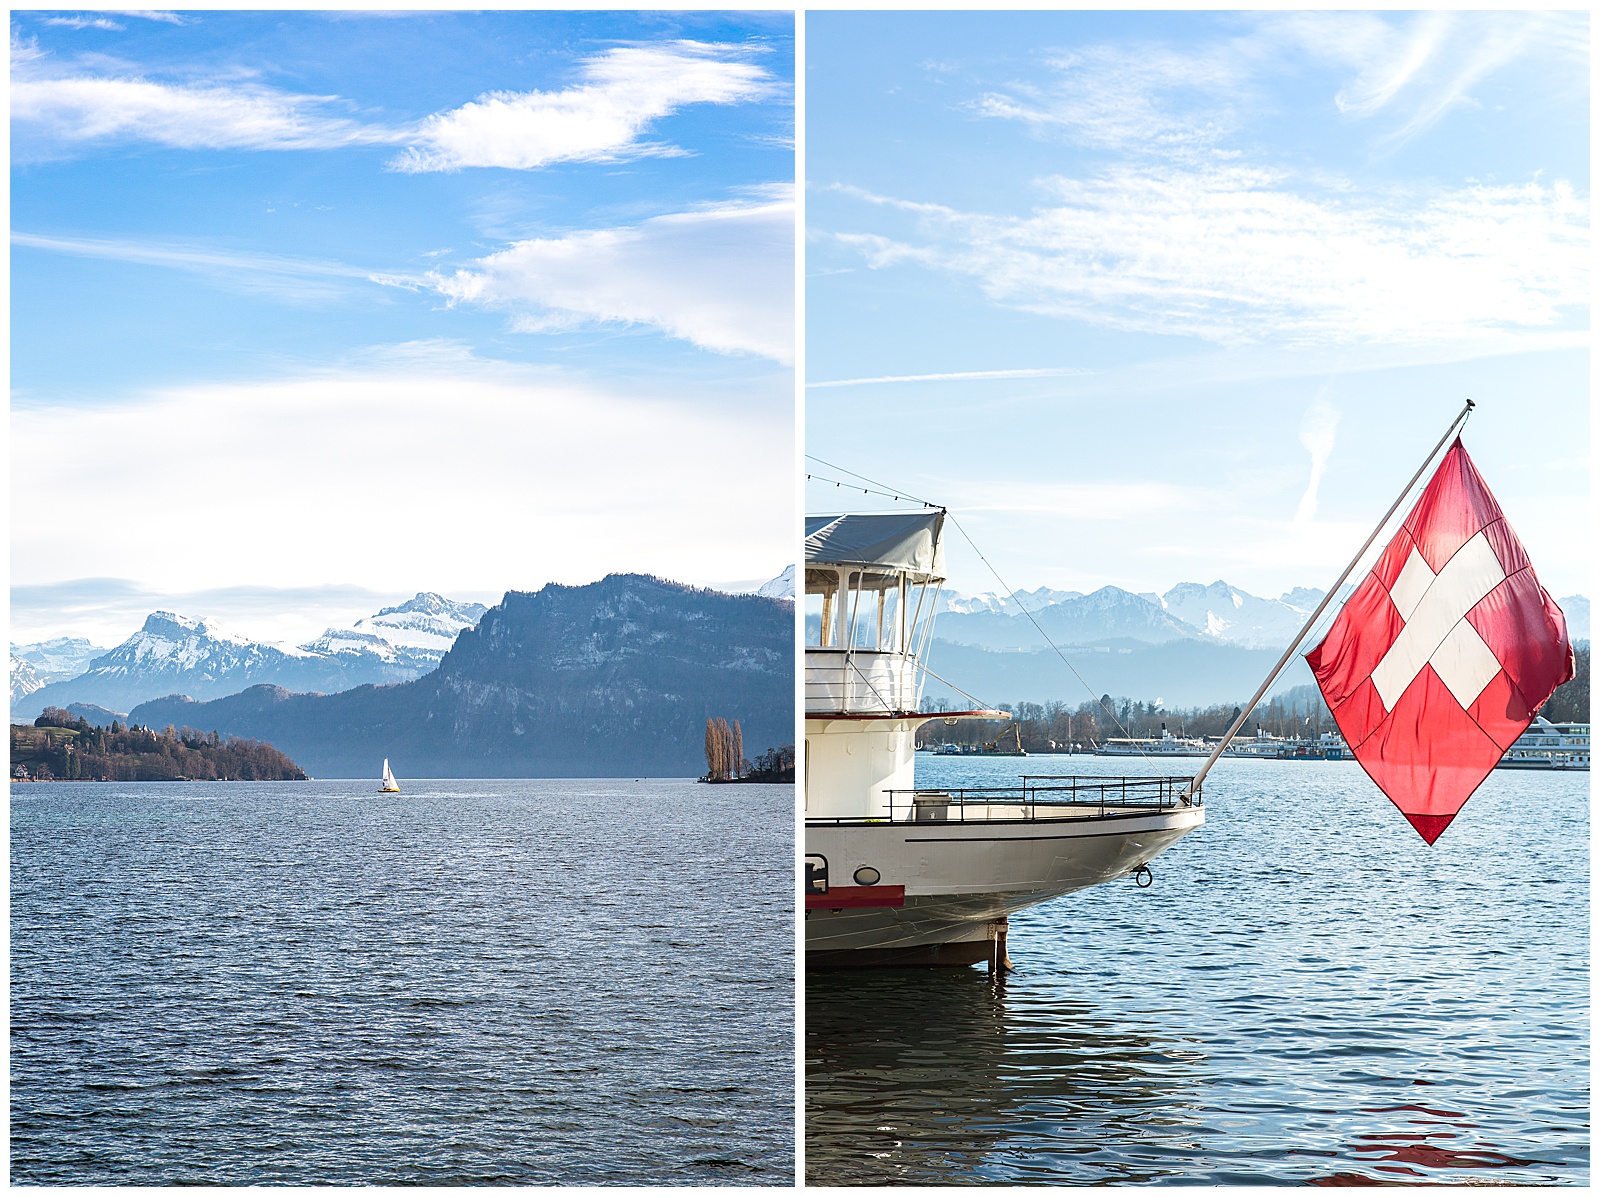 Lake Luzern on a blue bird day in January with boats on the water